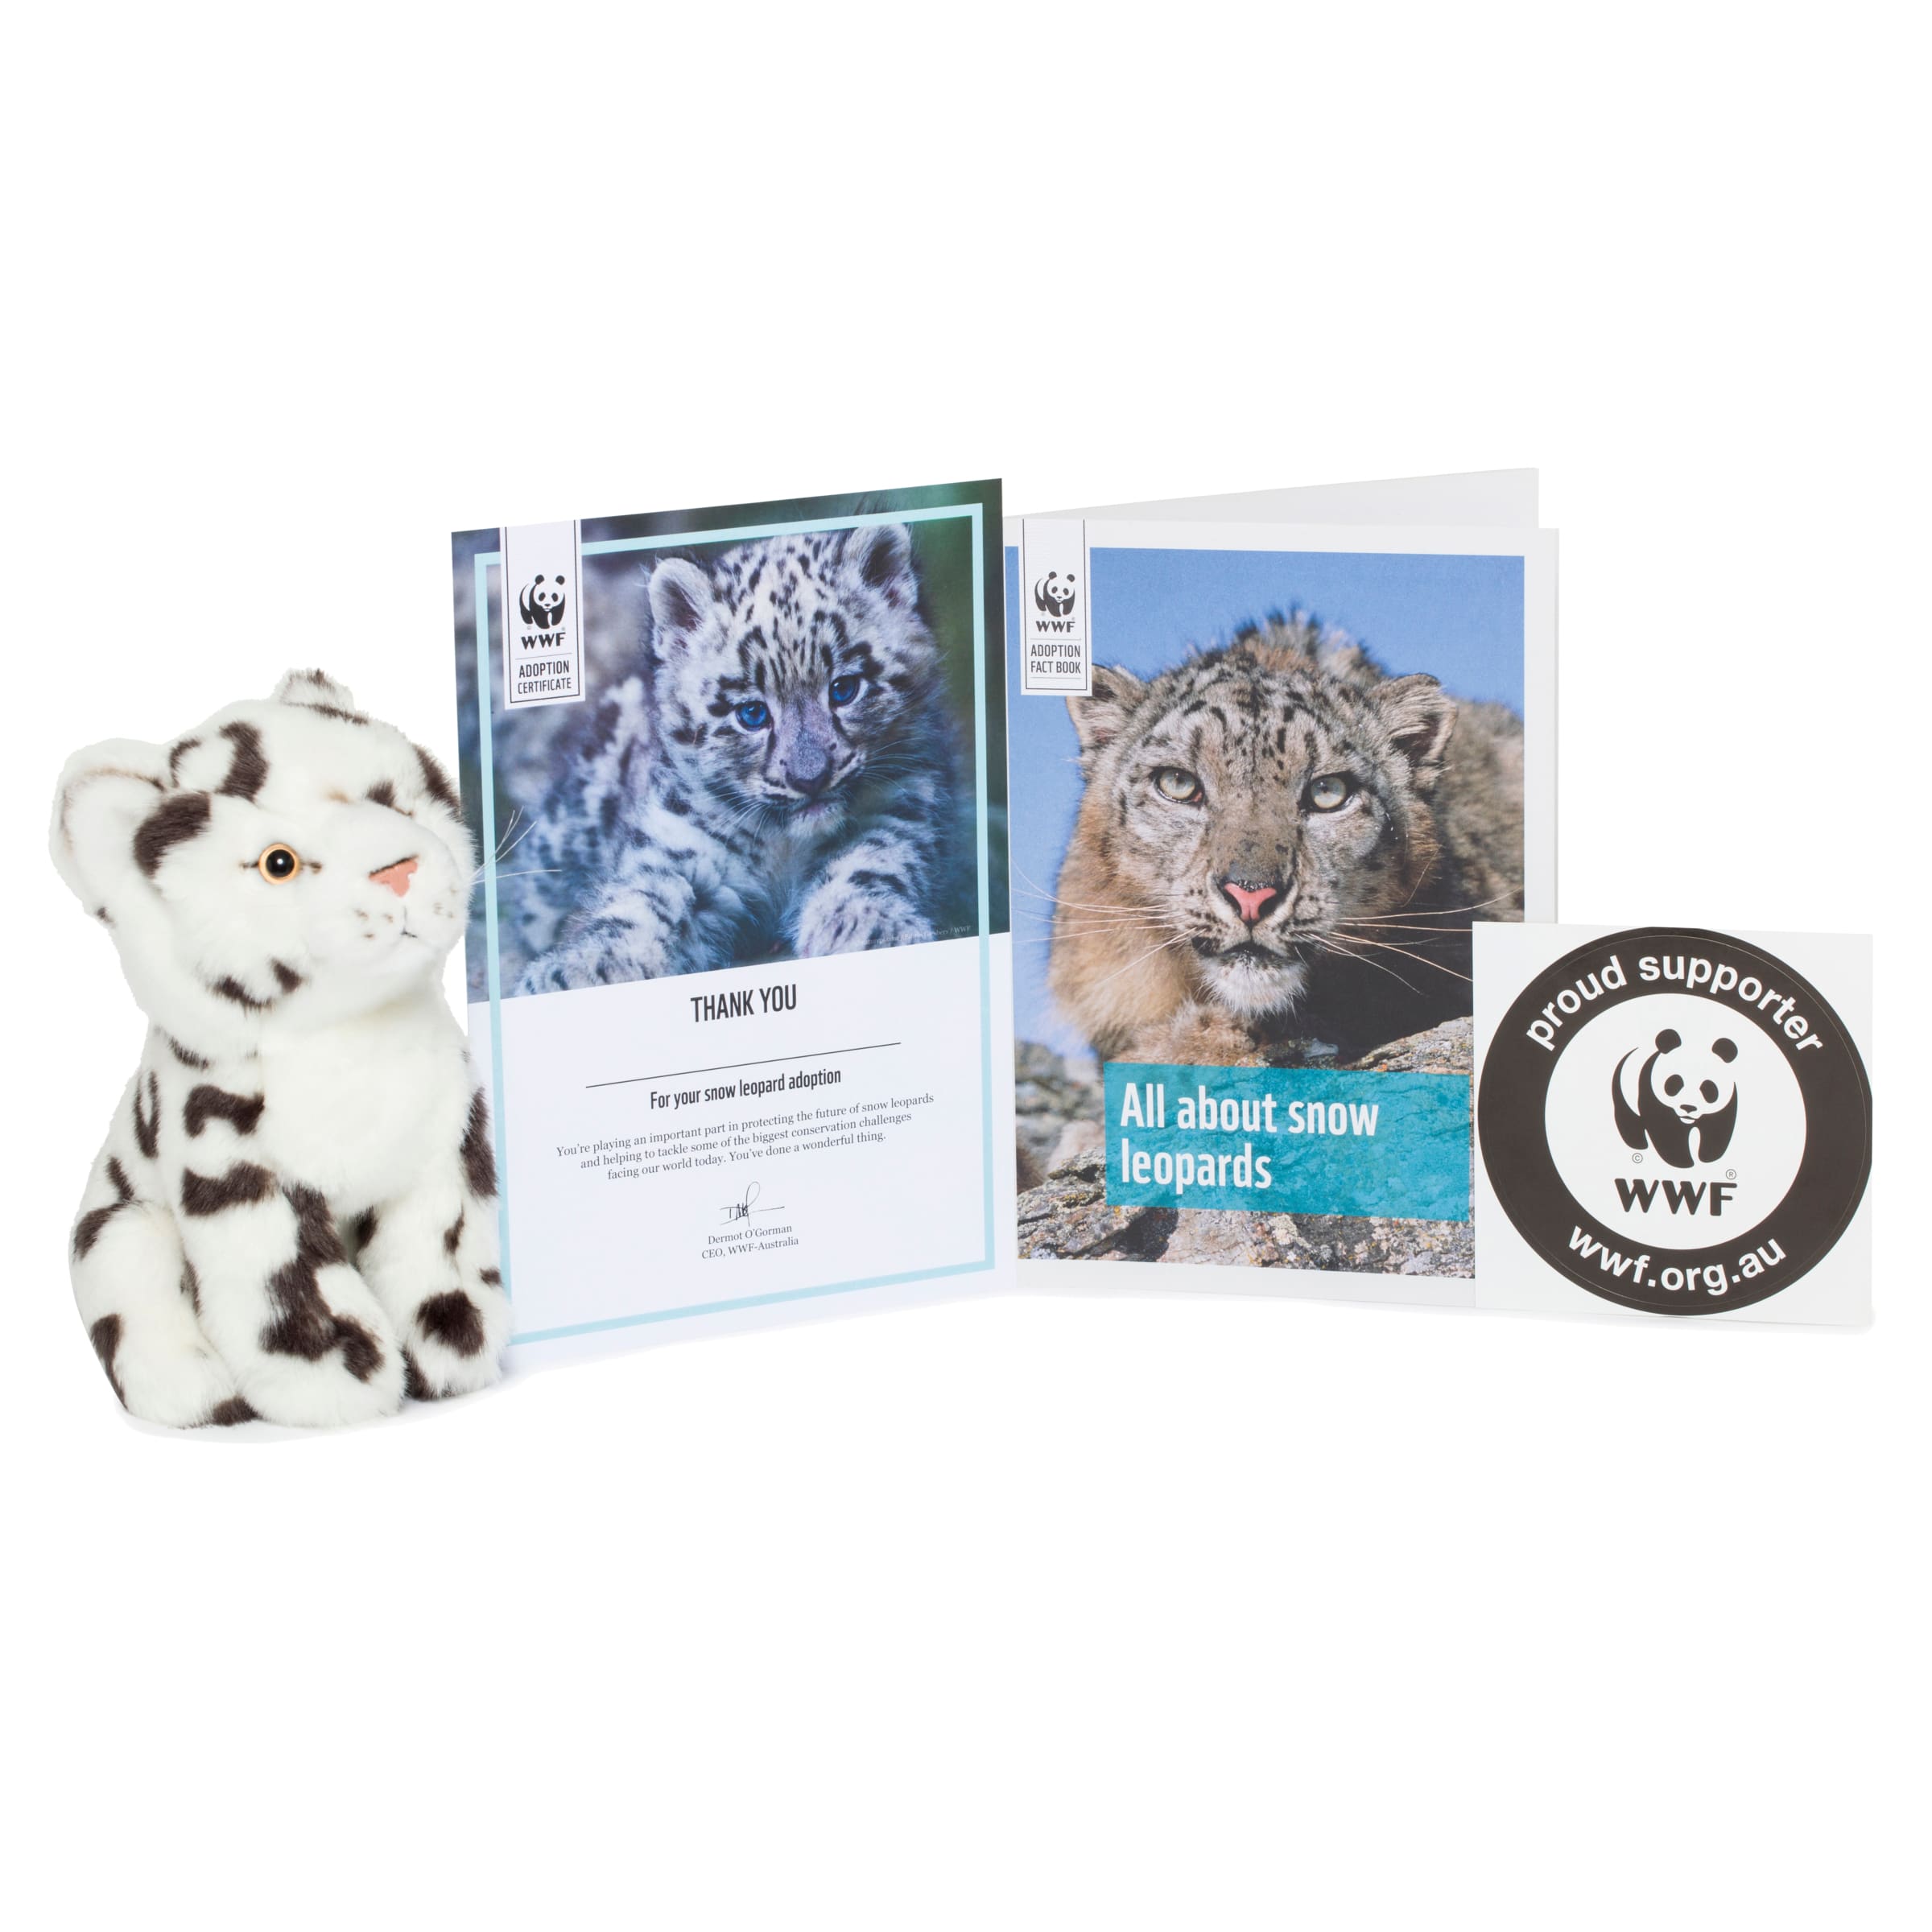 Adopt a Snow Leopard  Symbolic Adoptions from WWF